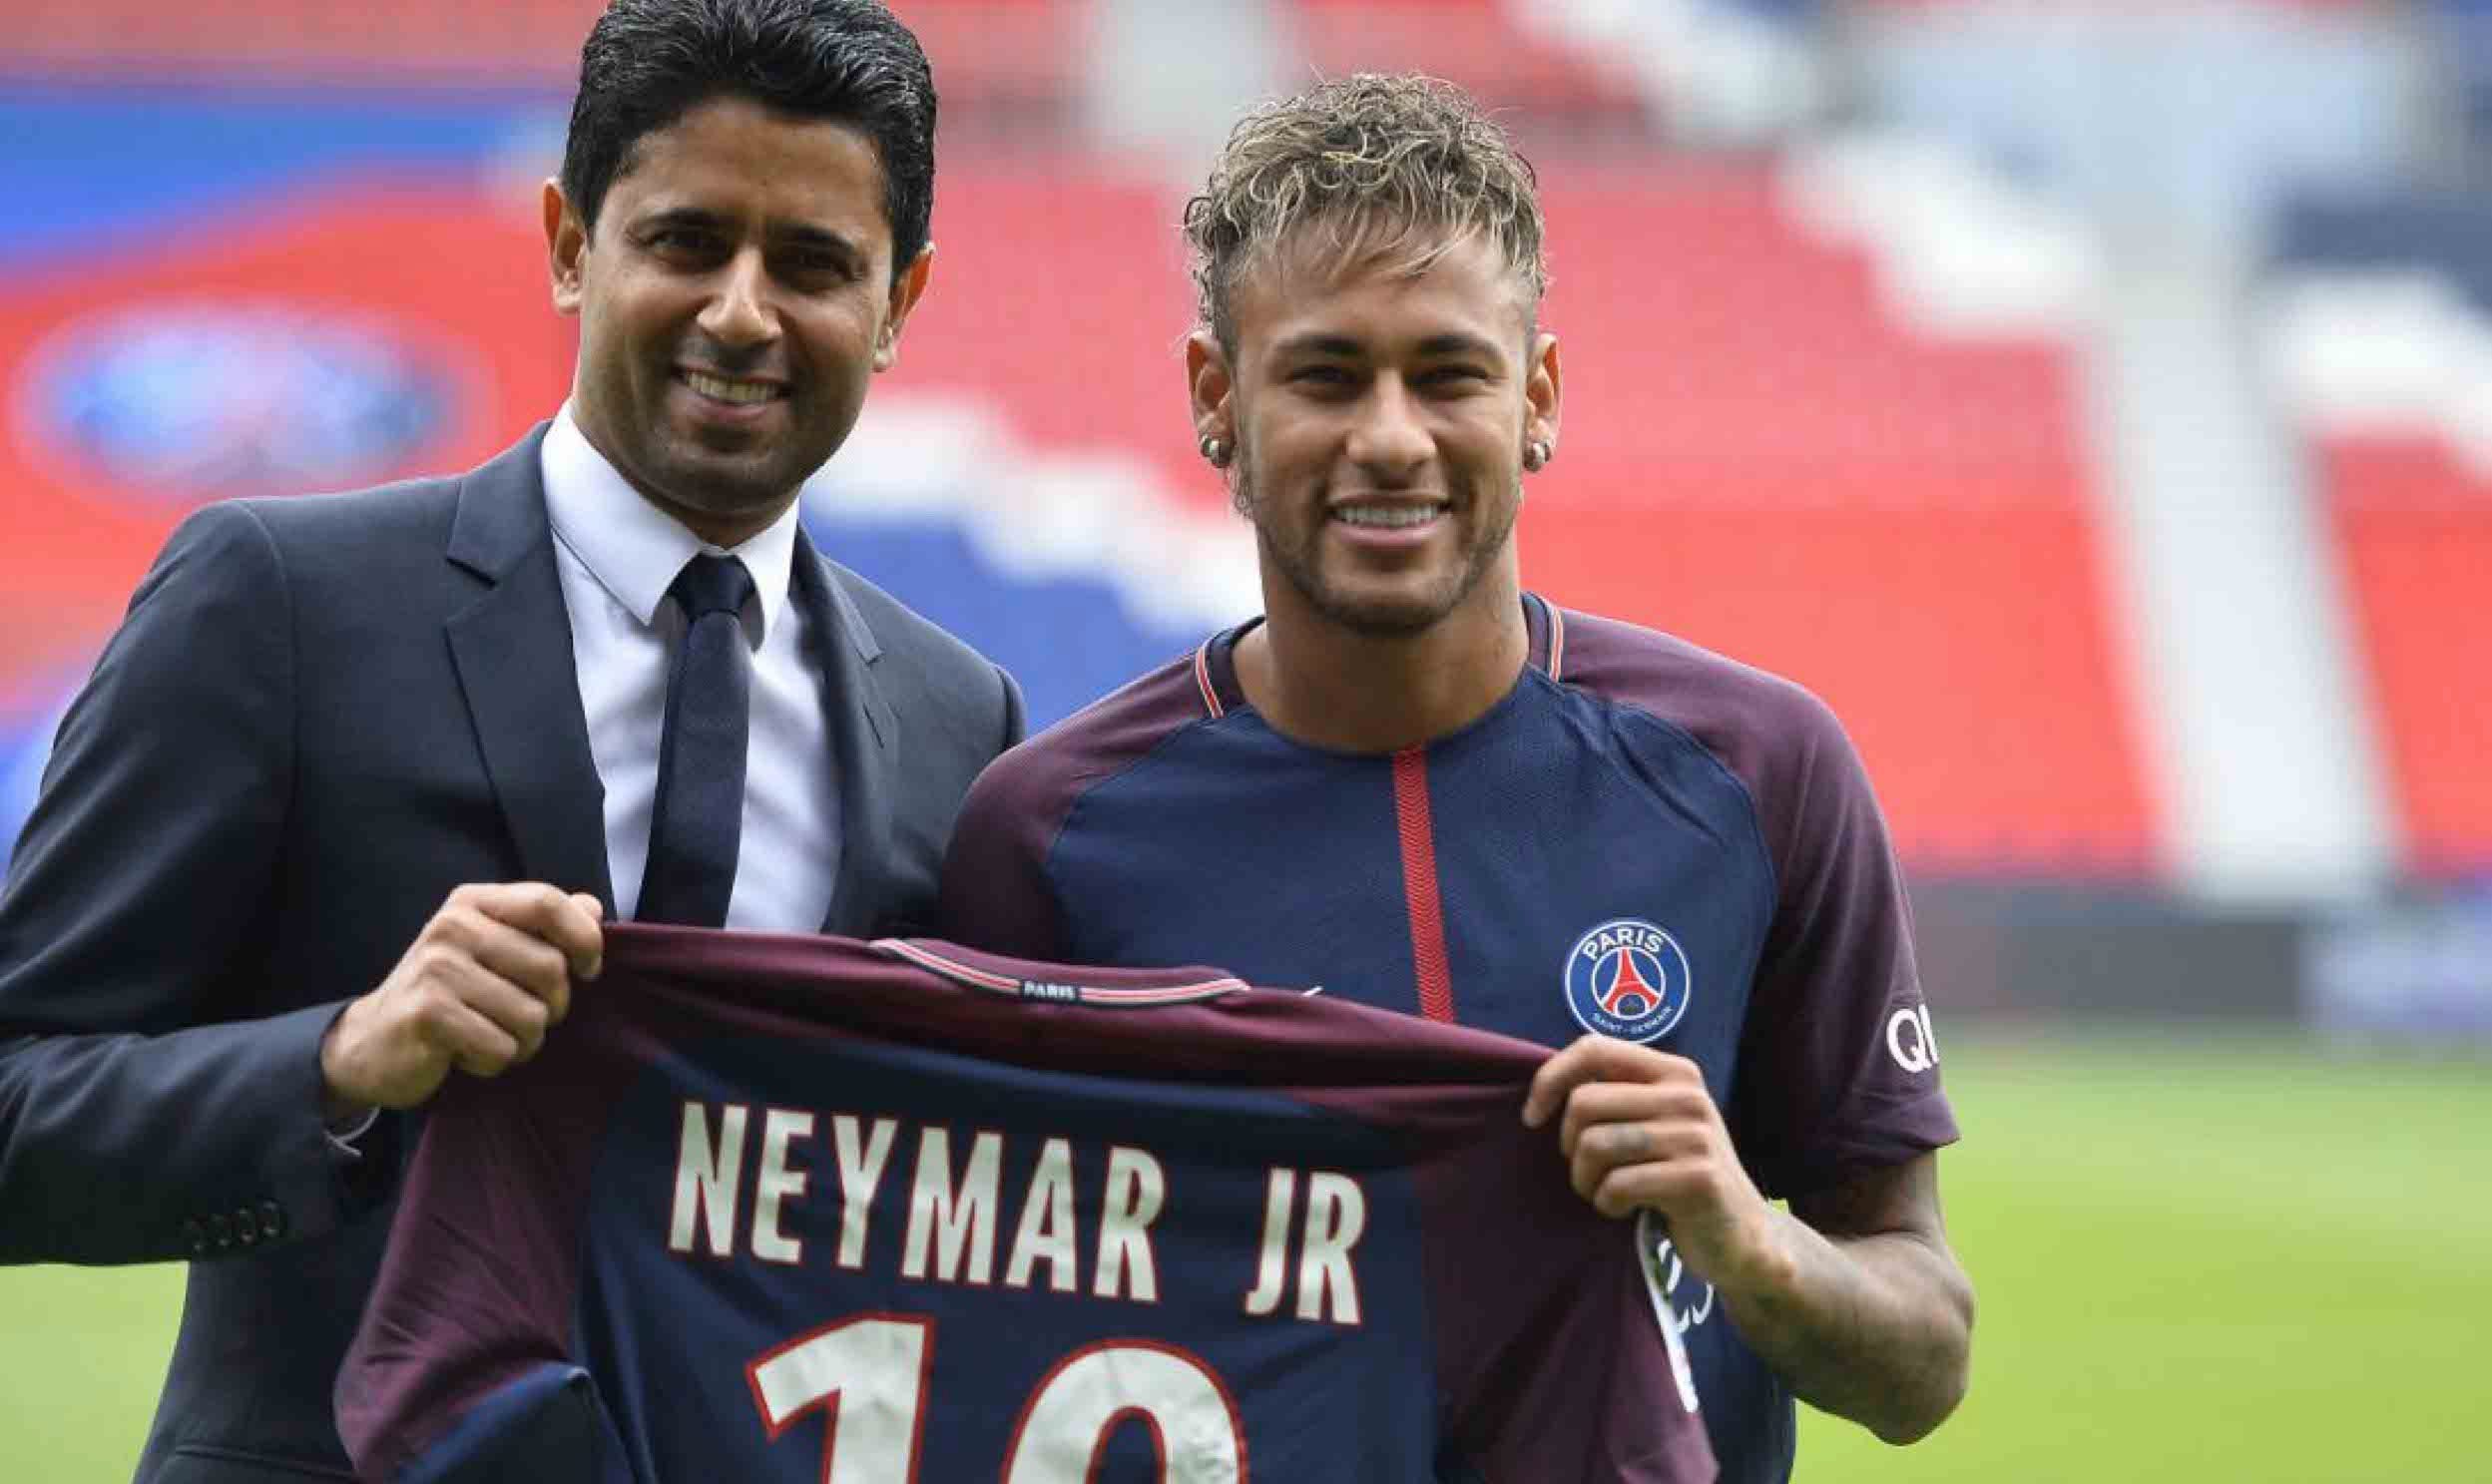 Football star, Neymar steps out in stylish outfit for the launch